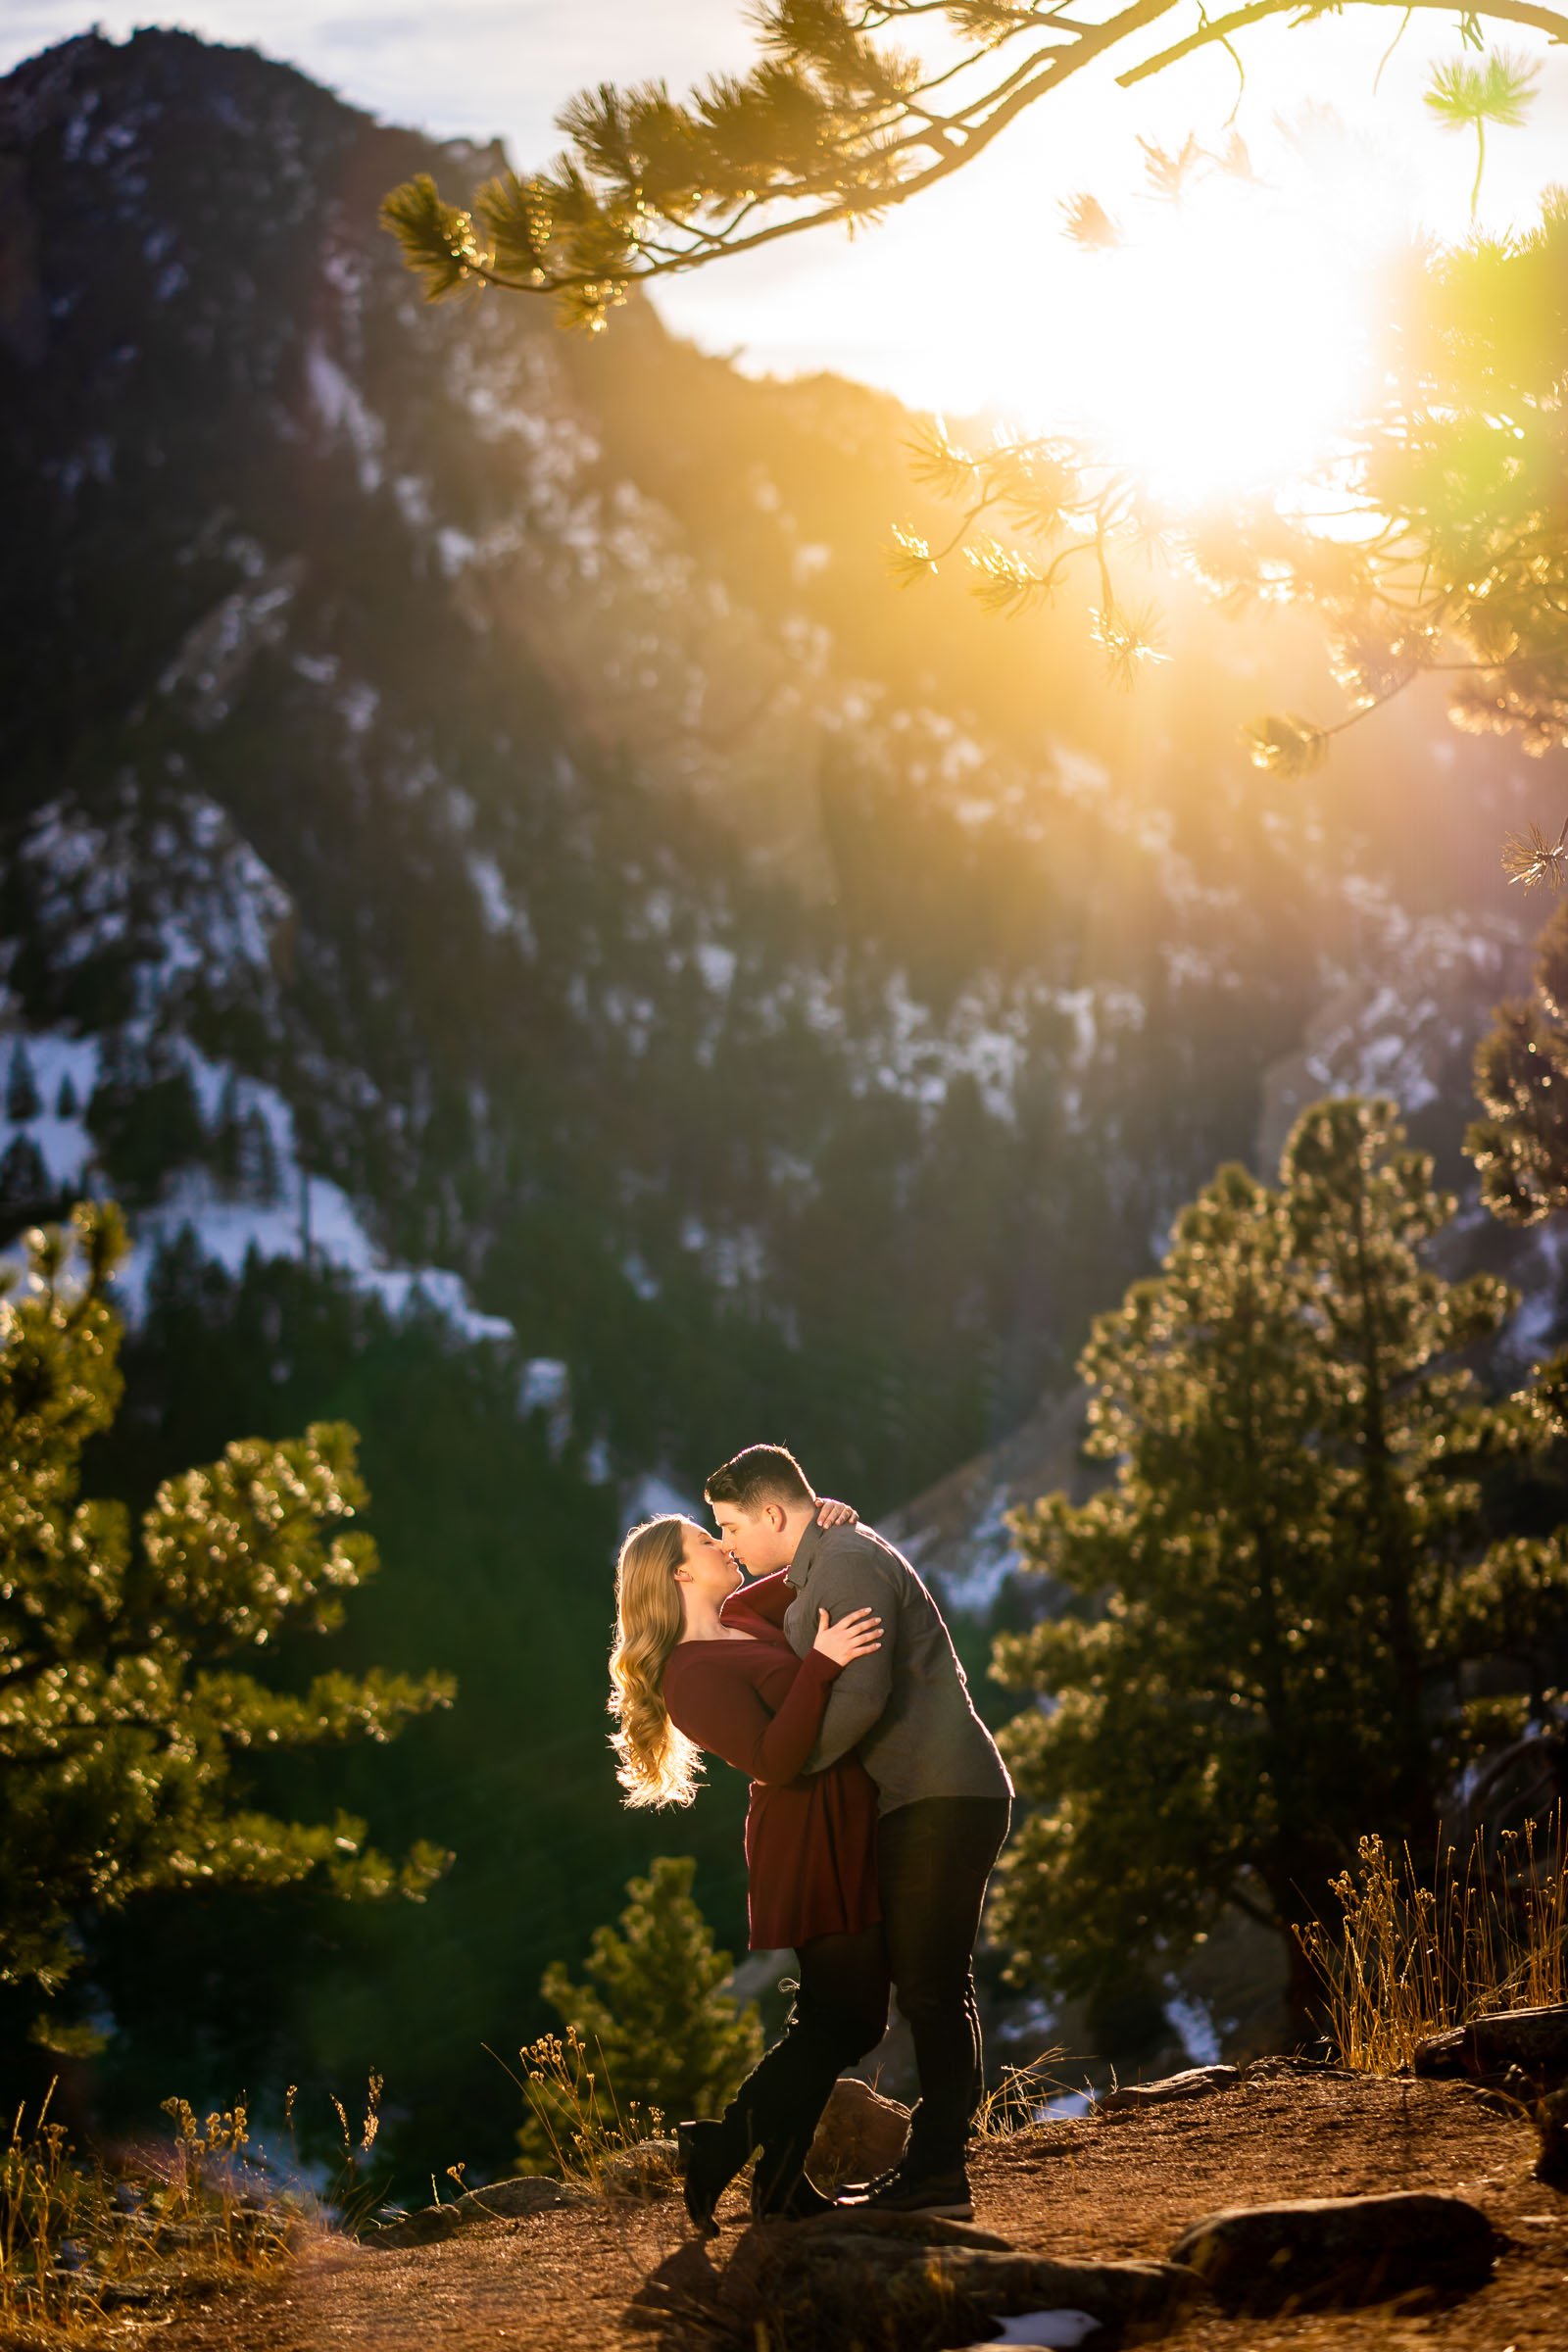 Engaged couple poses for portraits with the flatiron mountains in the background, Mountain Engagement Photos, Engagement Session, Engagement Photos, Engagement Photos Inspiration, Engagement Photography, Engagement Photographer, Engagement Portraits, Winter Engagement Photos, Snow Engagement Photos, Boulder engagement session, Boulder engagement photos, Boulder engagement photography, Boulder engagement photographer, Boulder engagement inspiration, NCAR Trail engagement session, NCAR Trail engagement photos, NCAR Trail engagement photography, NCAR Trail engagement photographer, NCAR Trail engagement inspiration, Colorado engagement session, Colorado engagement photos, Colorado engagement photography, Colorado engagement photographer, Colorado engagement inspiration, Flatiron Engagement Photos, Chautauqua Engagement Photos